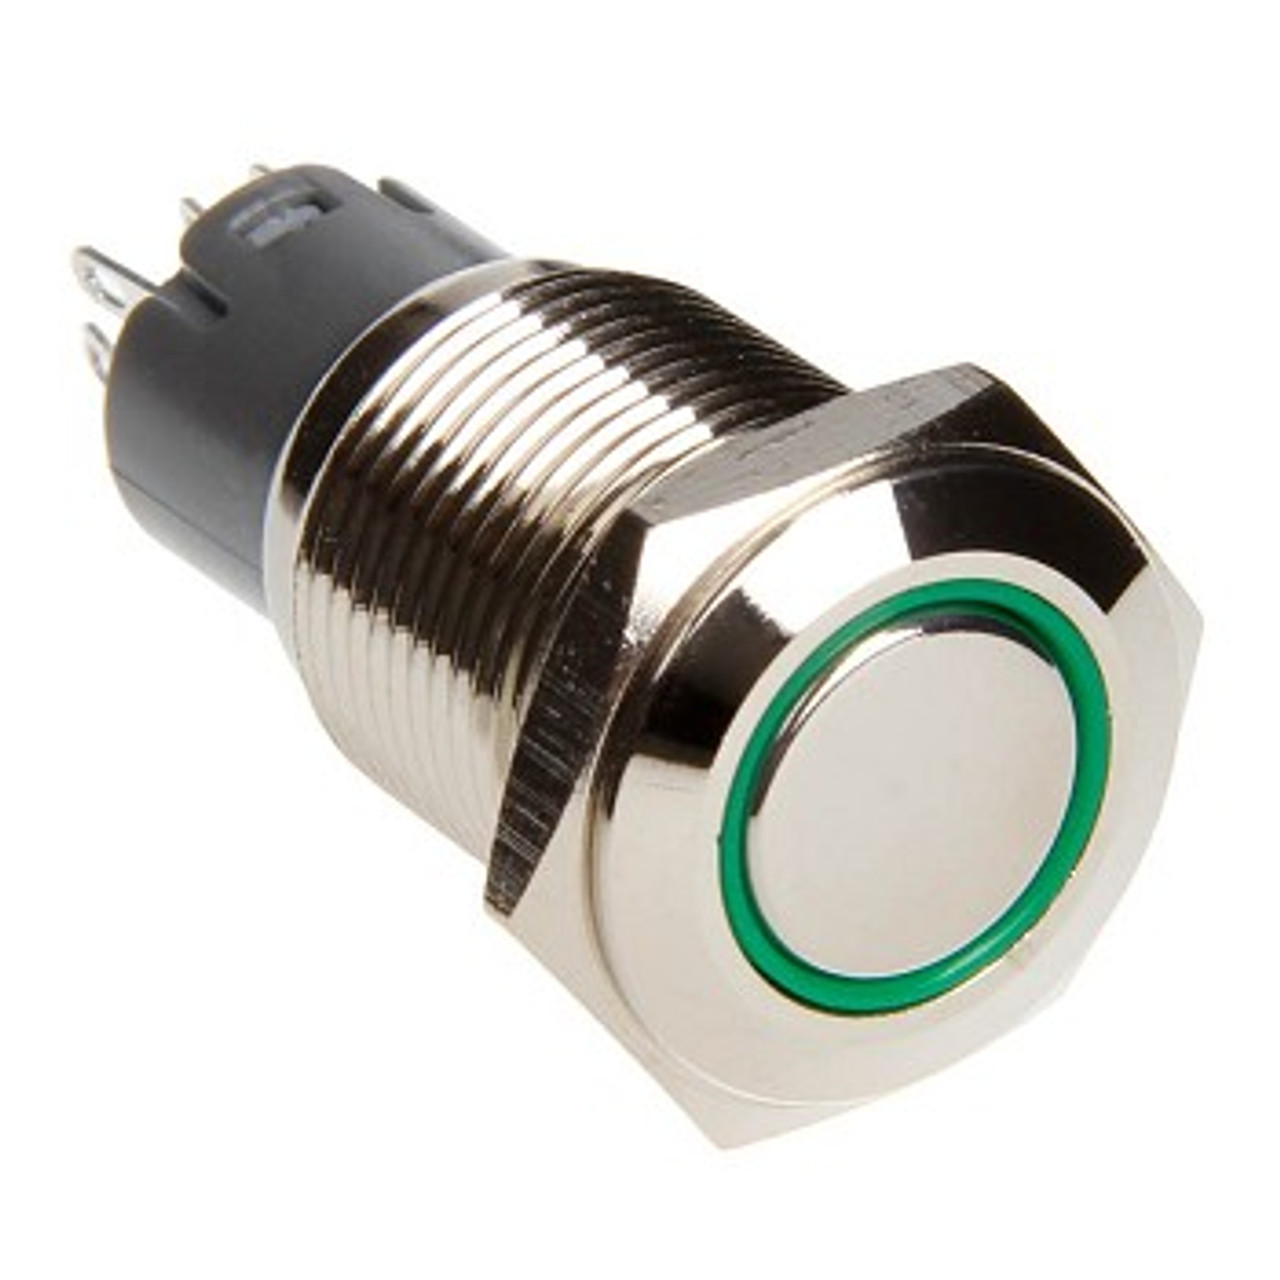 16mm LED 2-Position On/Off Switch Green Chrome Finish Race Sport Lighting